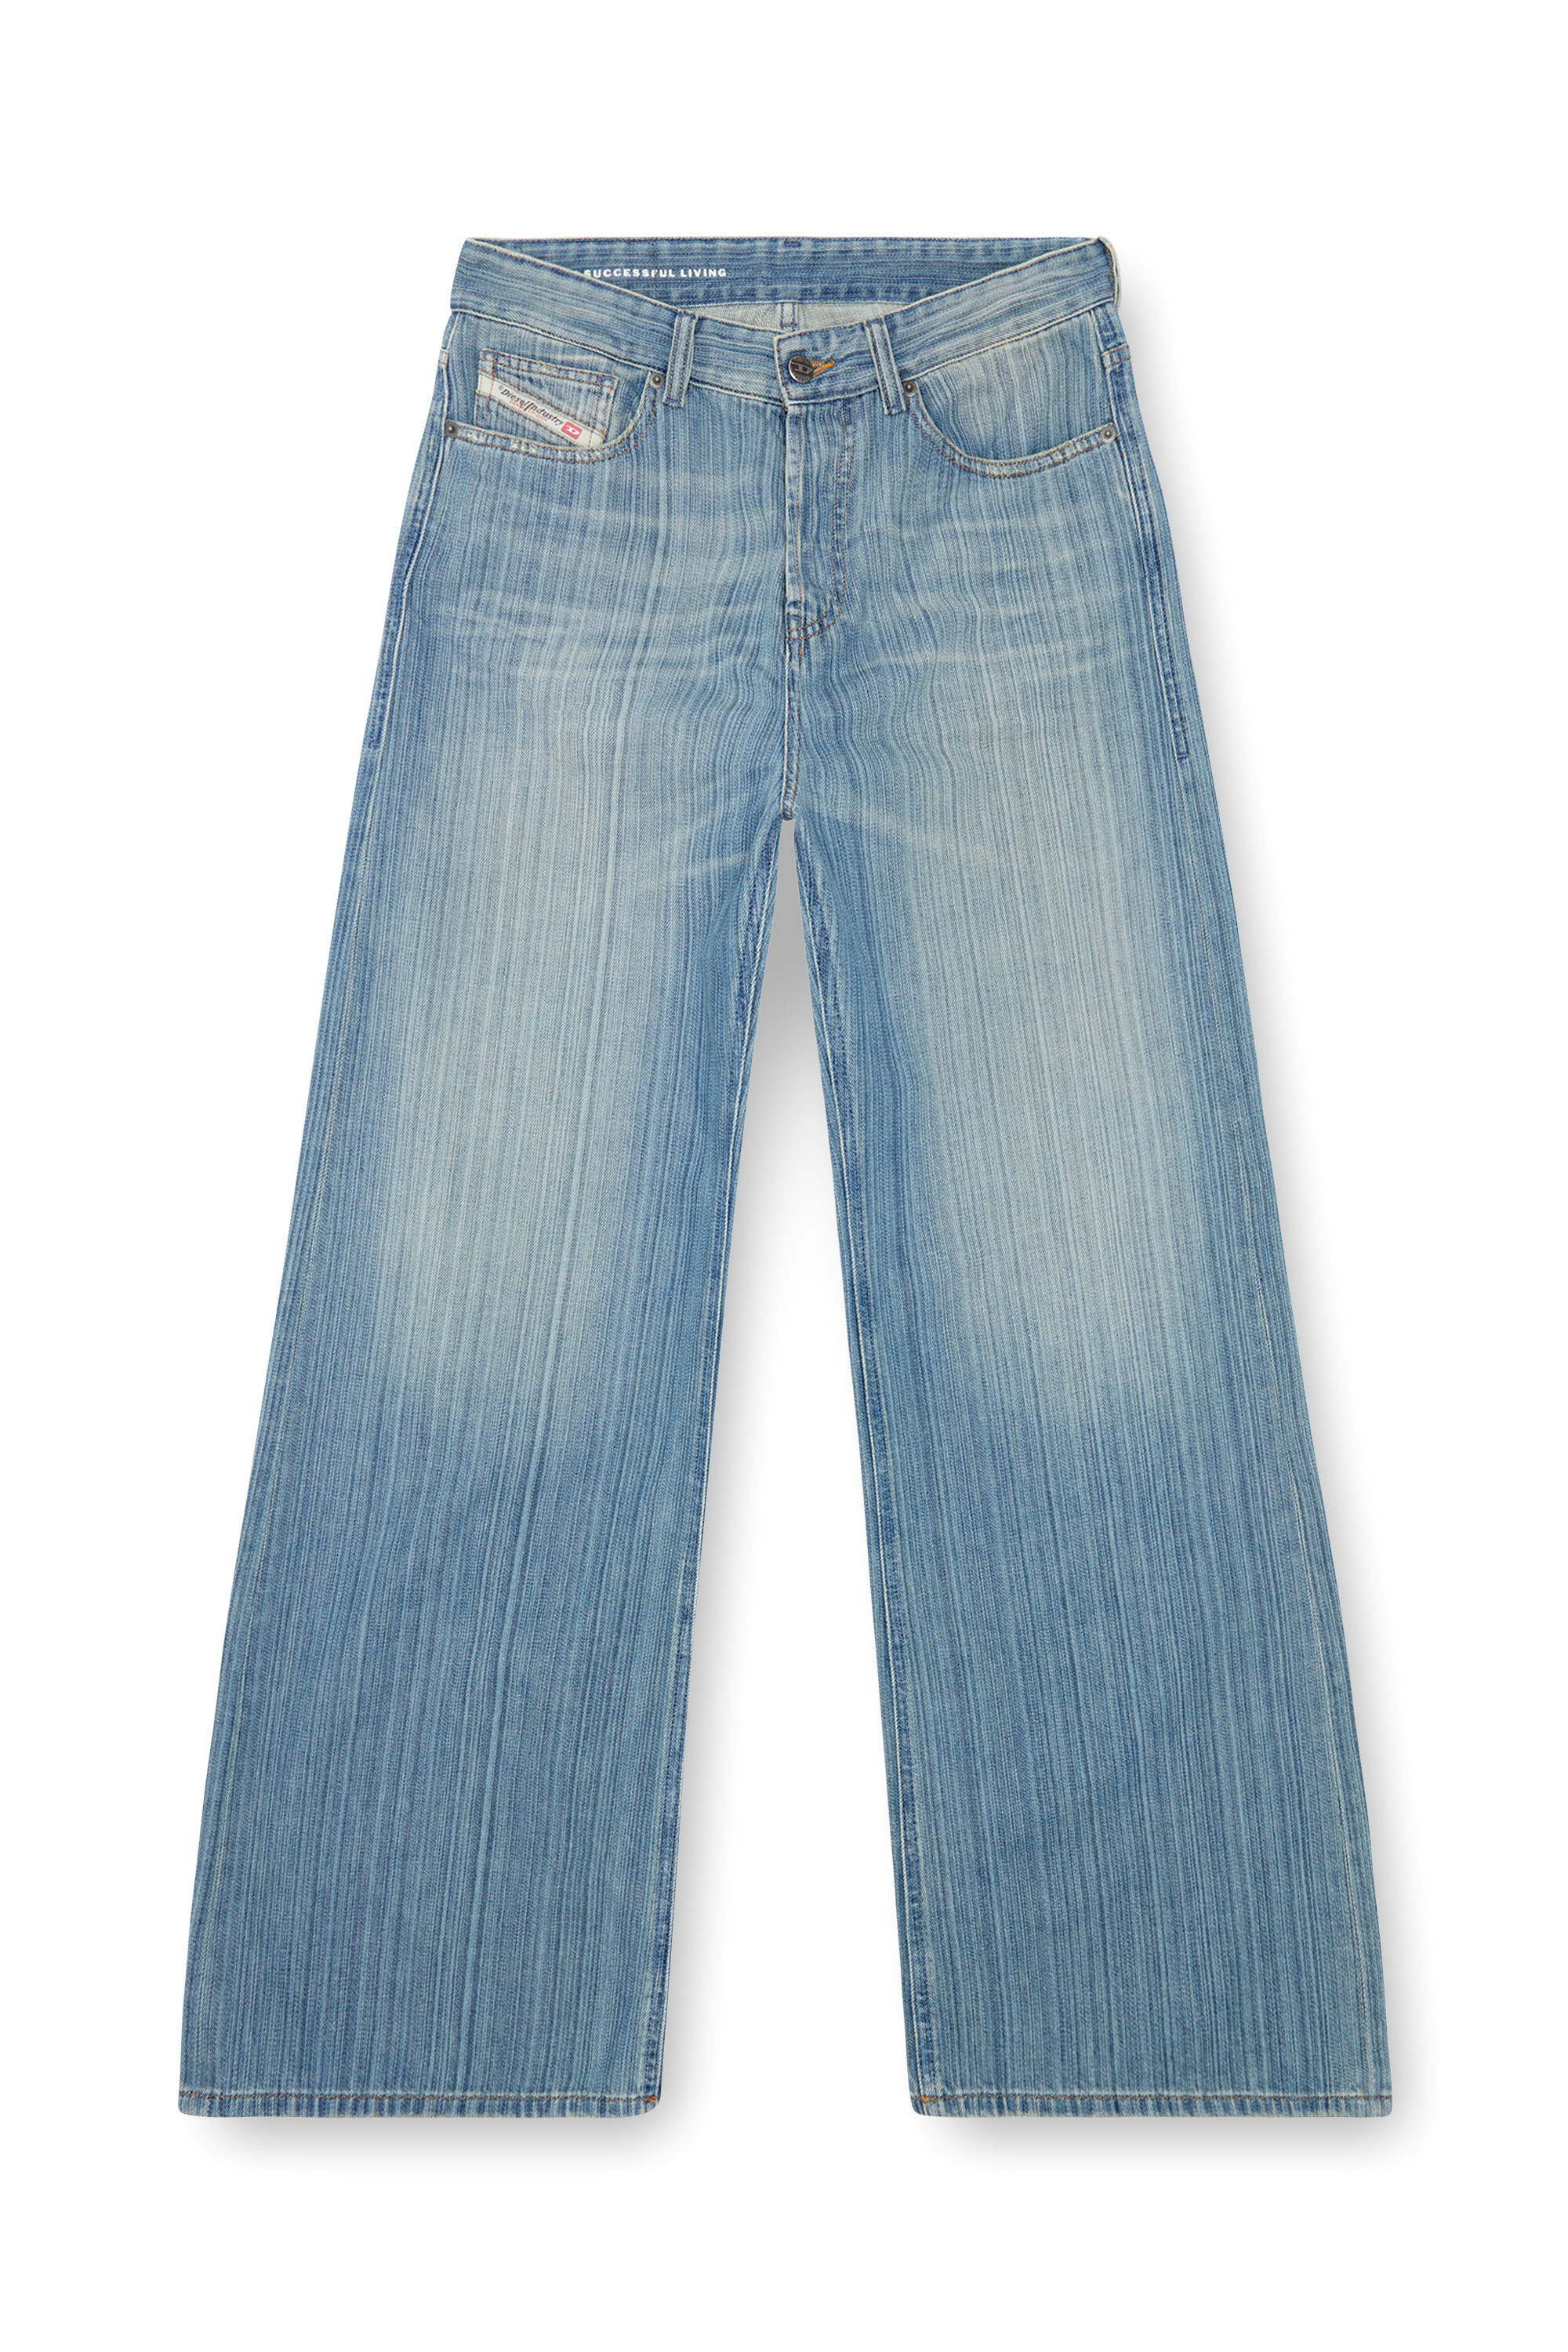 Diesel - Straight Jeans 1996 D-Sire 09J87, Mujer Straight Jeans - 1996 D-Sire in Azul marino - Image 3